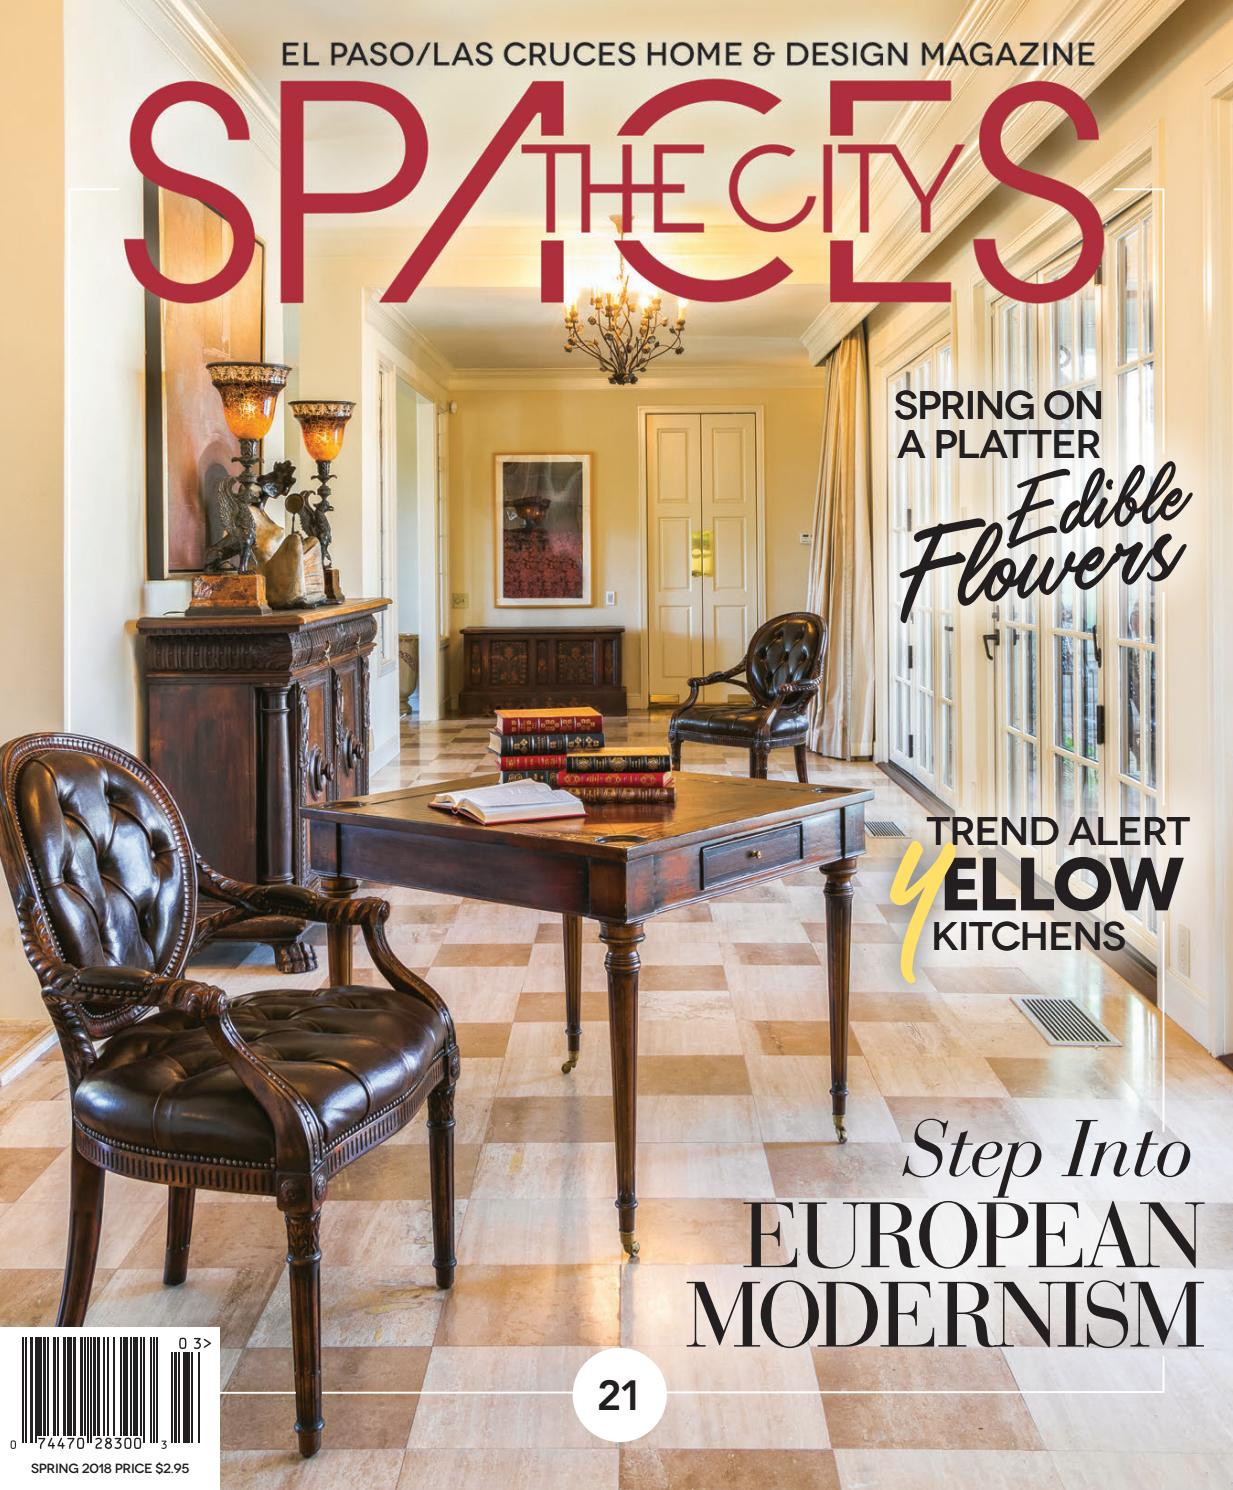 18 Unique Hand Scraped Hardwood Floors Dallas Cost 2024 free download hand scraped hardwood floors dallas cost of thecity spaces e280a2 spring 2018 by thecity magazine el paso las cruces within thecity spaces e280a2 spring 2018 by thecity magazine el paso las 